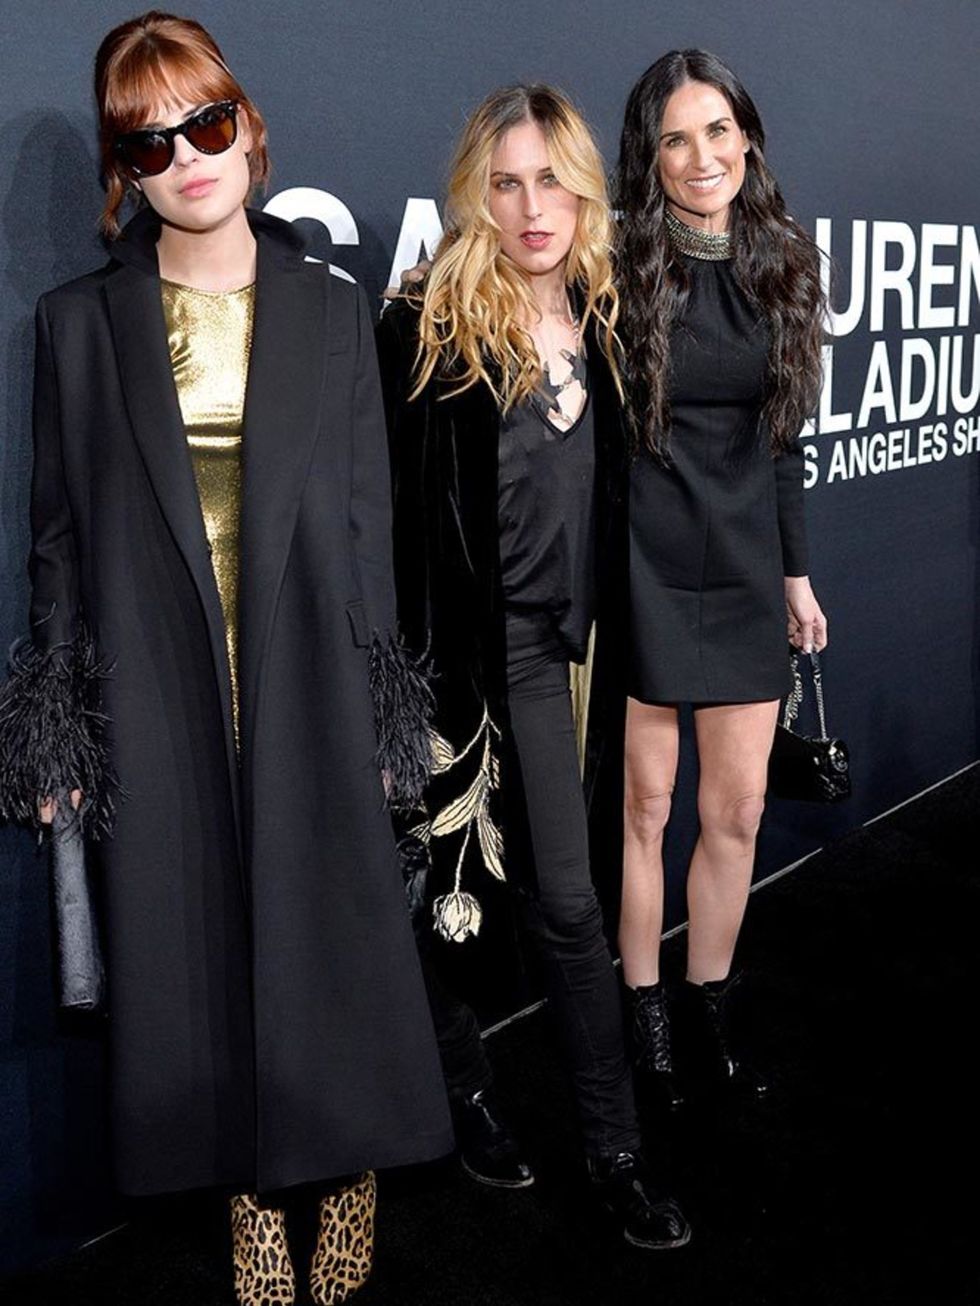 Talulah Willis, Scout Willis and Demi Moore attend the Saint Laurent at the Palladium show in LA, Februrary 2016.